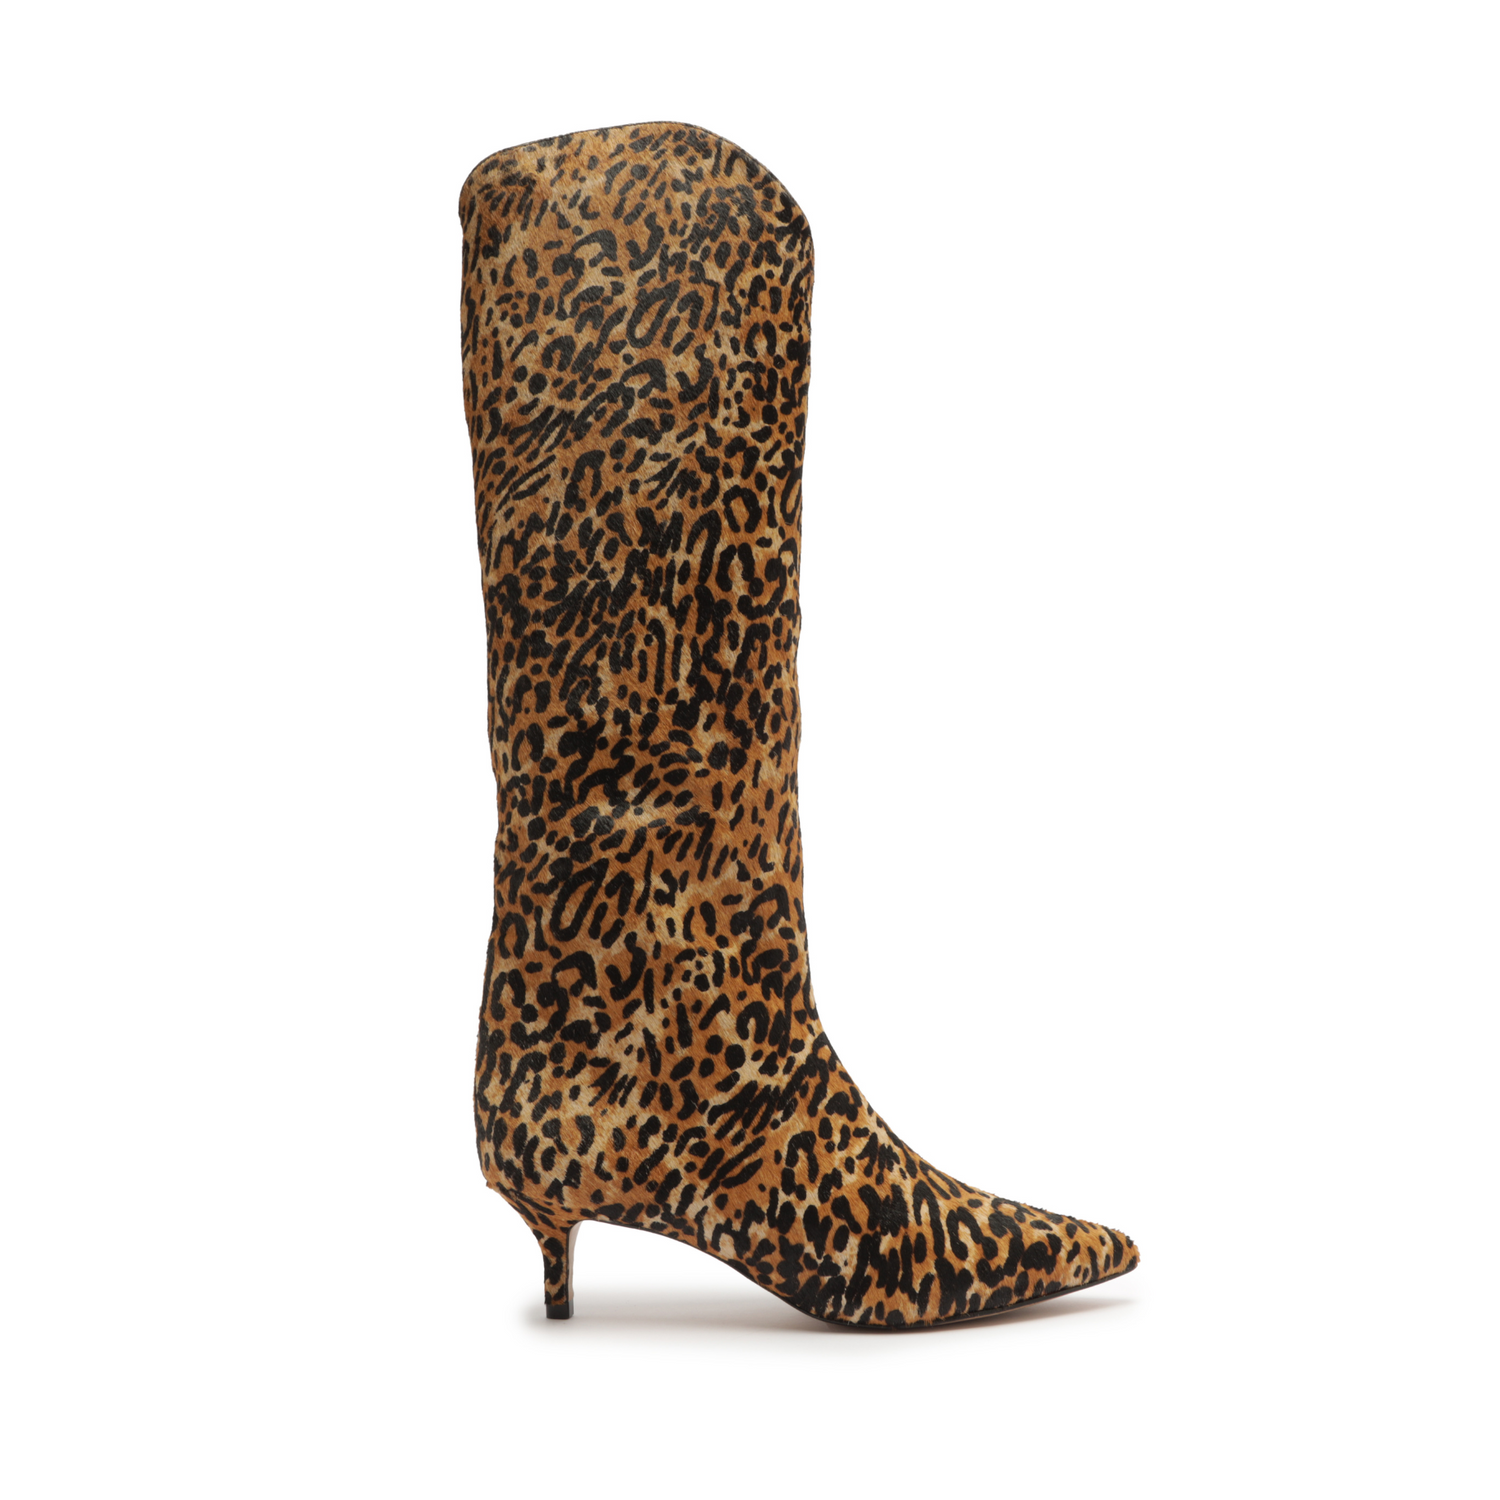 Maryana Lo  Boot Boots Fall 23 5 Natural Leather - Schutz Shoes